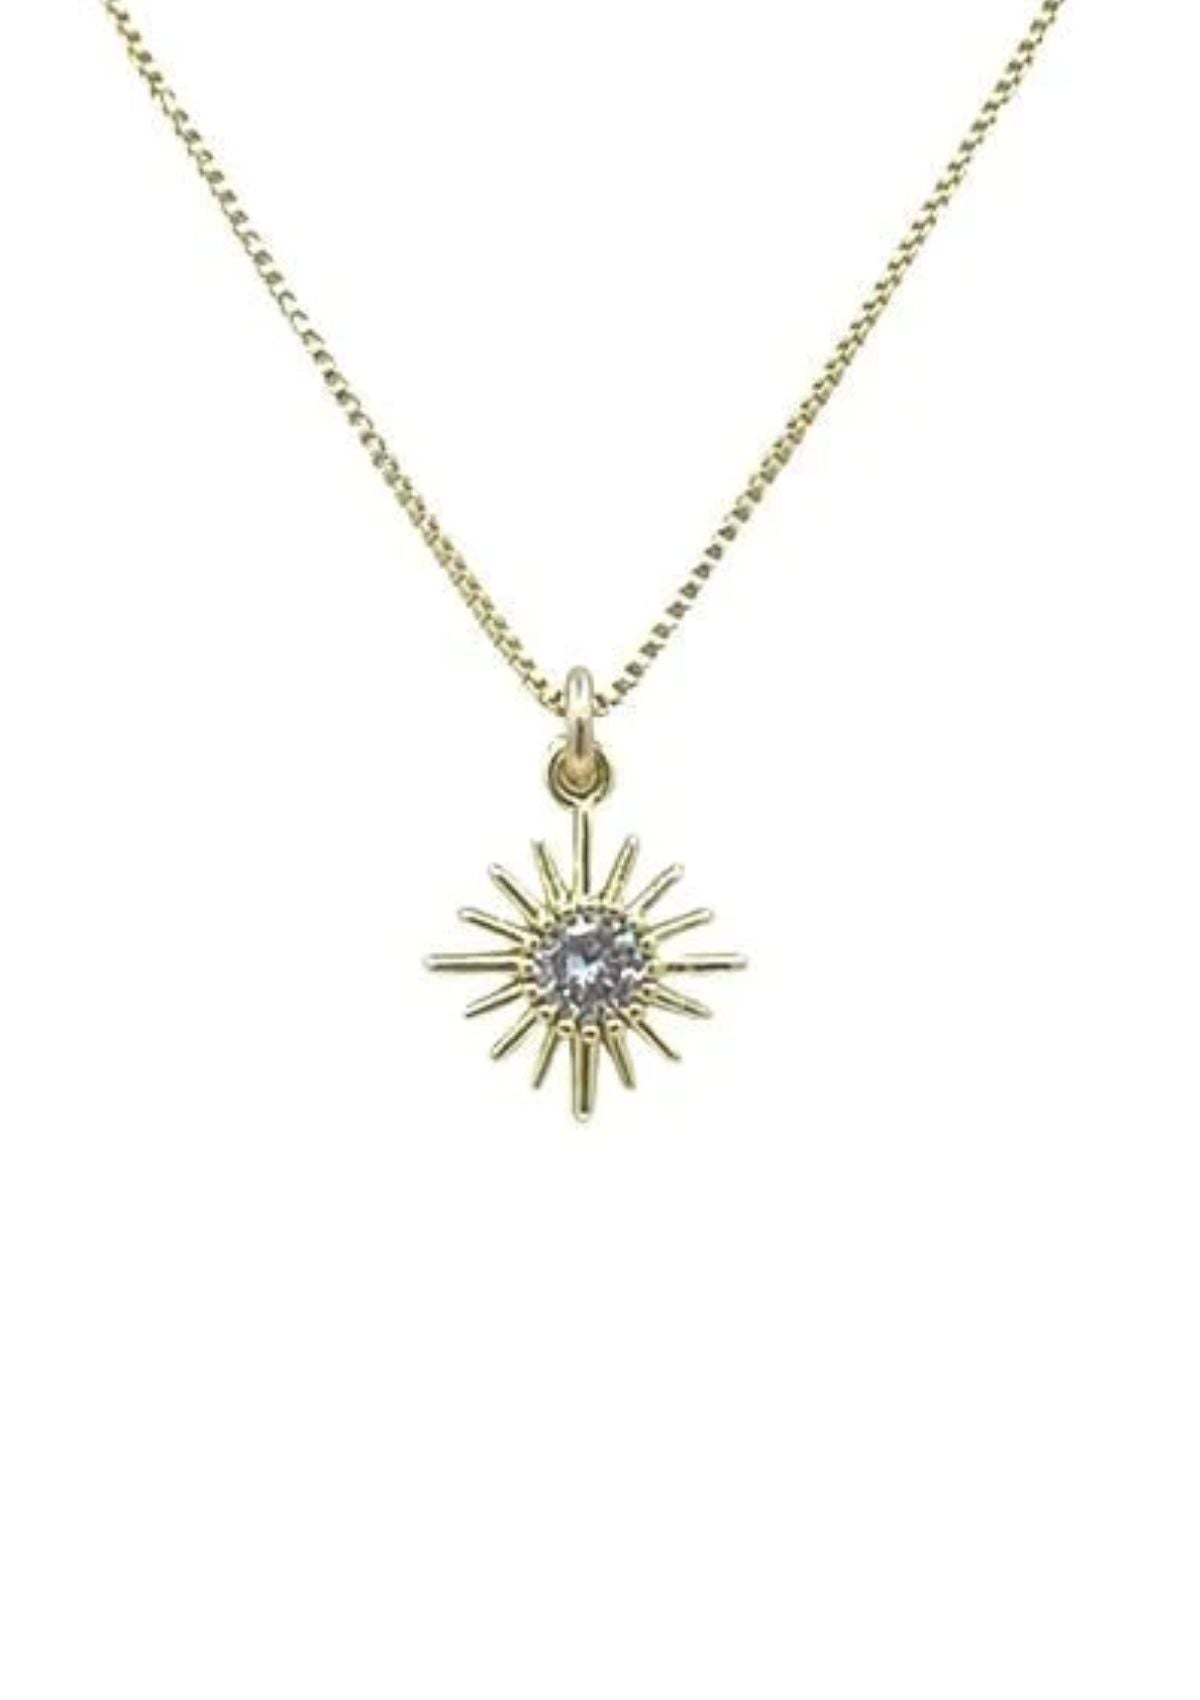 16 x 16mm Open Star CZ Center 18kt Gold Filled Charm on 18kt Gold Filled Chain